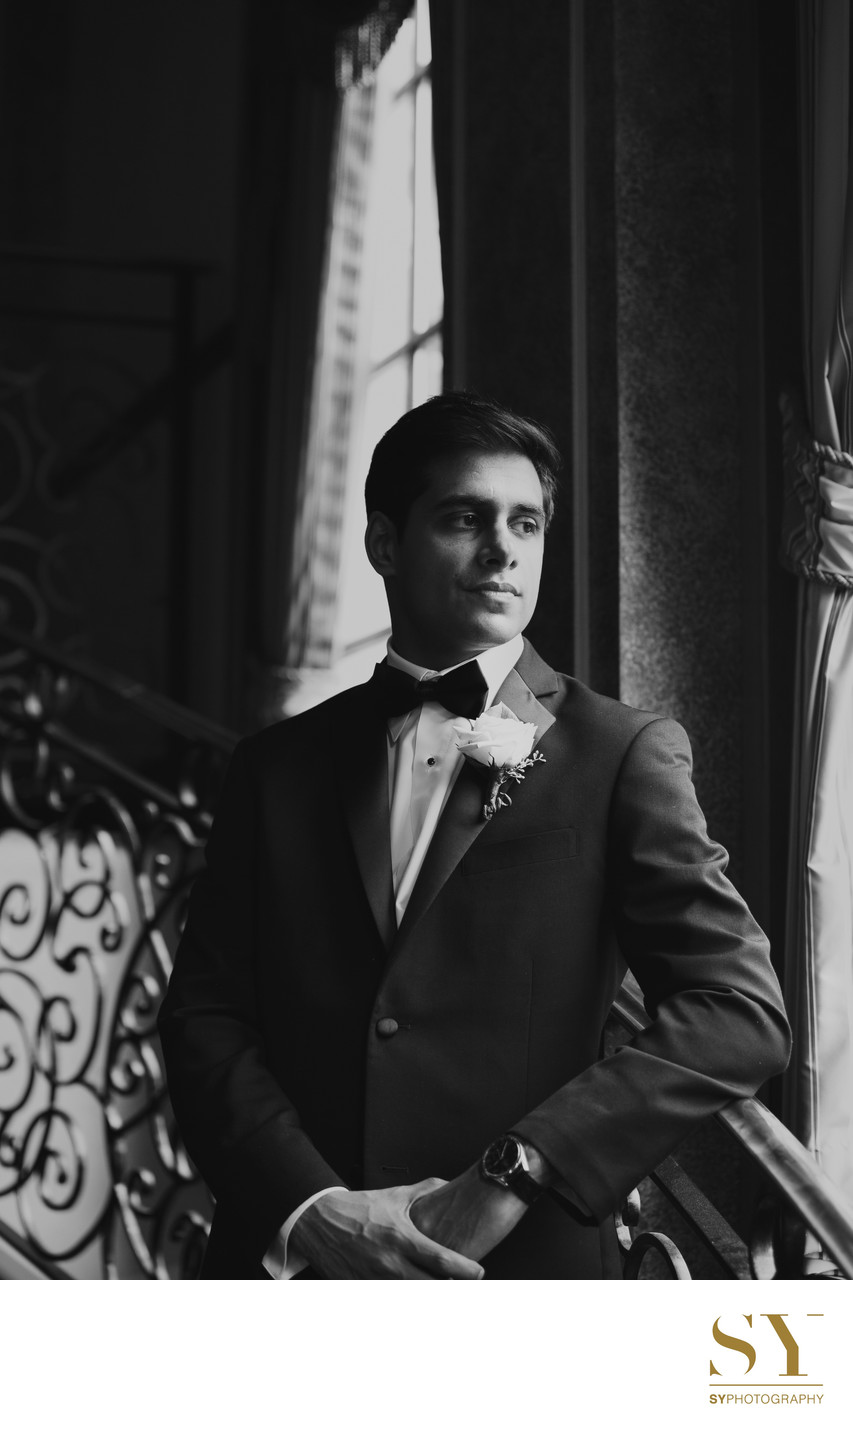 NYC groom portrait black and white photograph